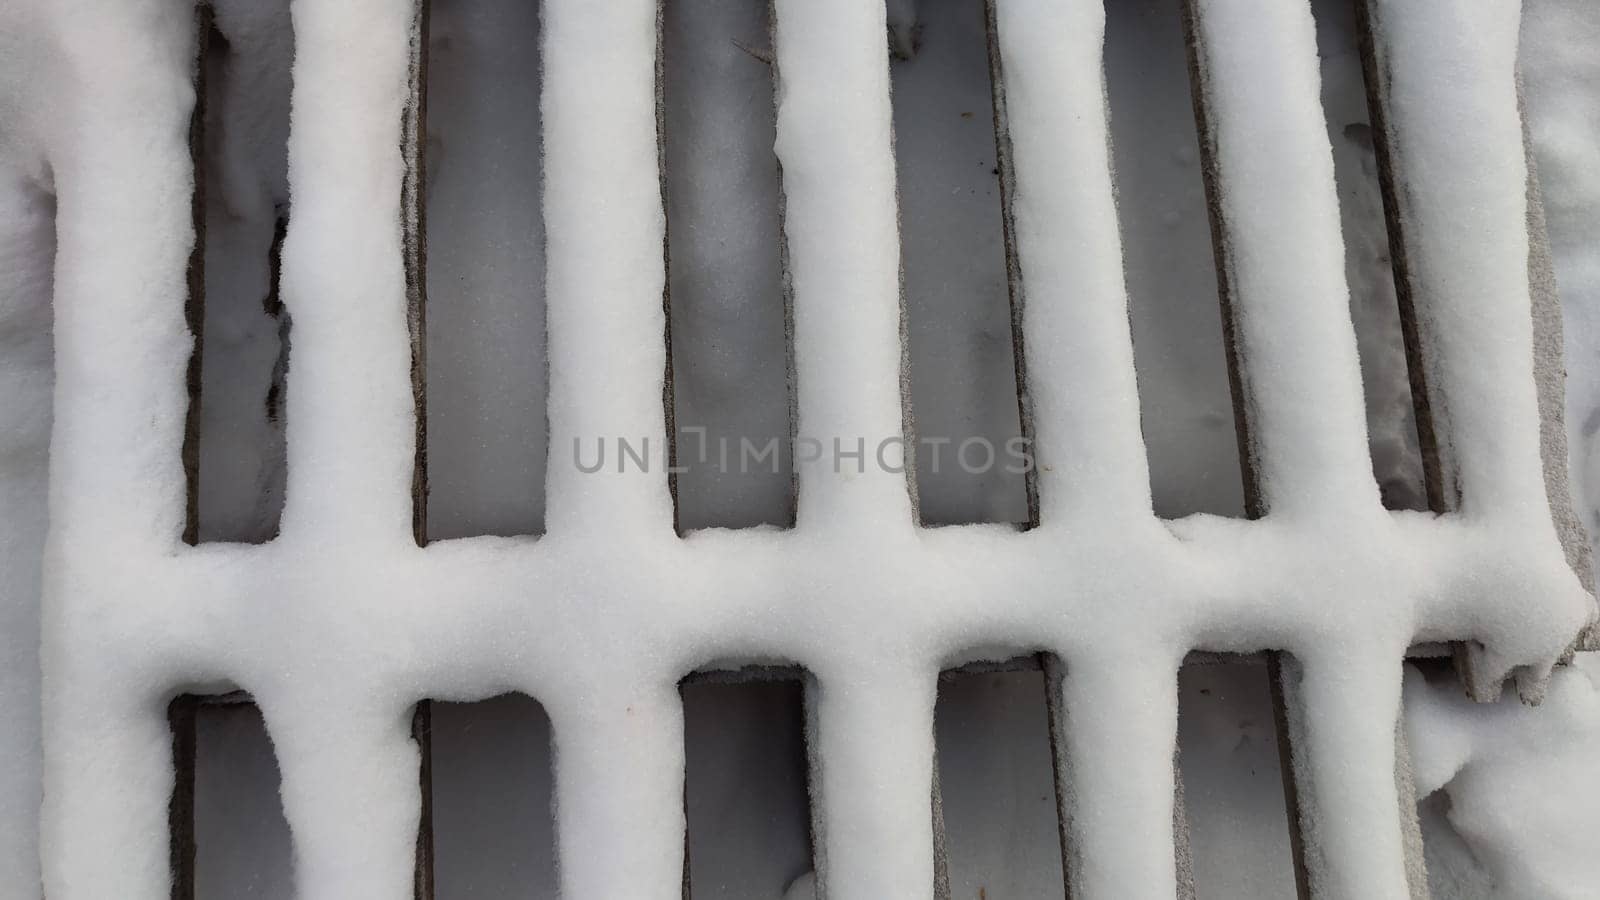 Abstract background and texture in the form of strips of wooden slats covered with white snow